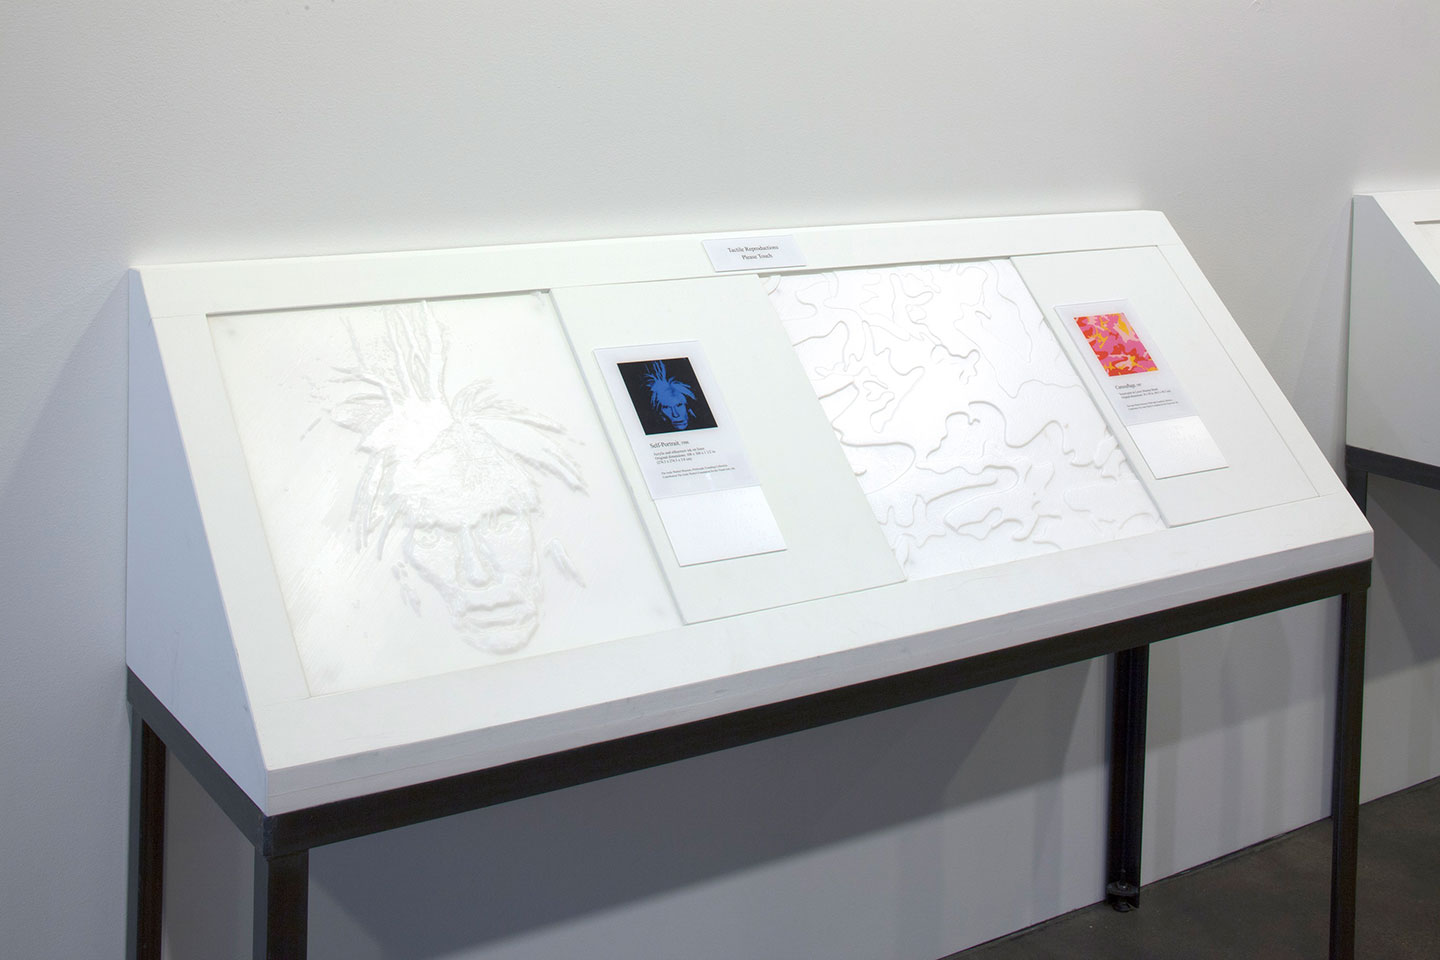 Two textured replicas of pictured artworks are presented on a table at waist height, angled upward at a 45 degree angle from the wall.